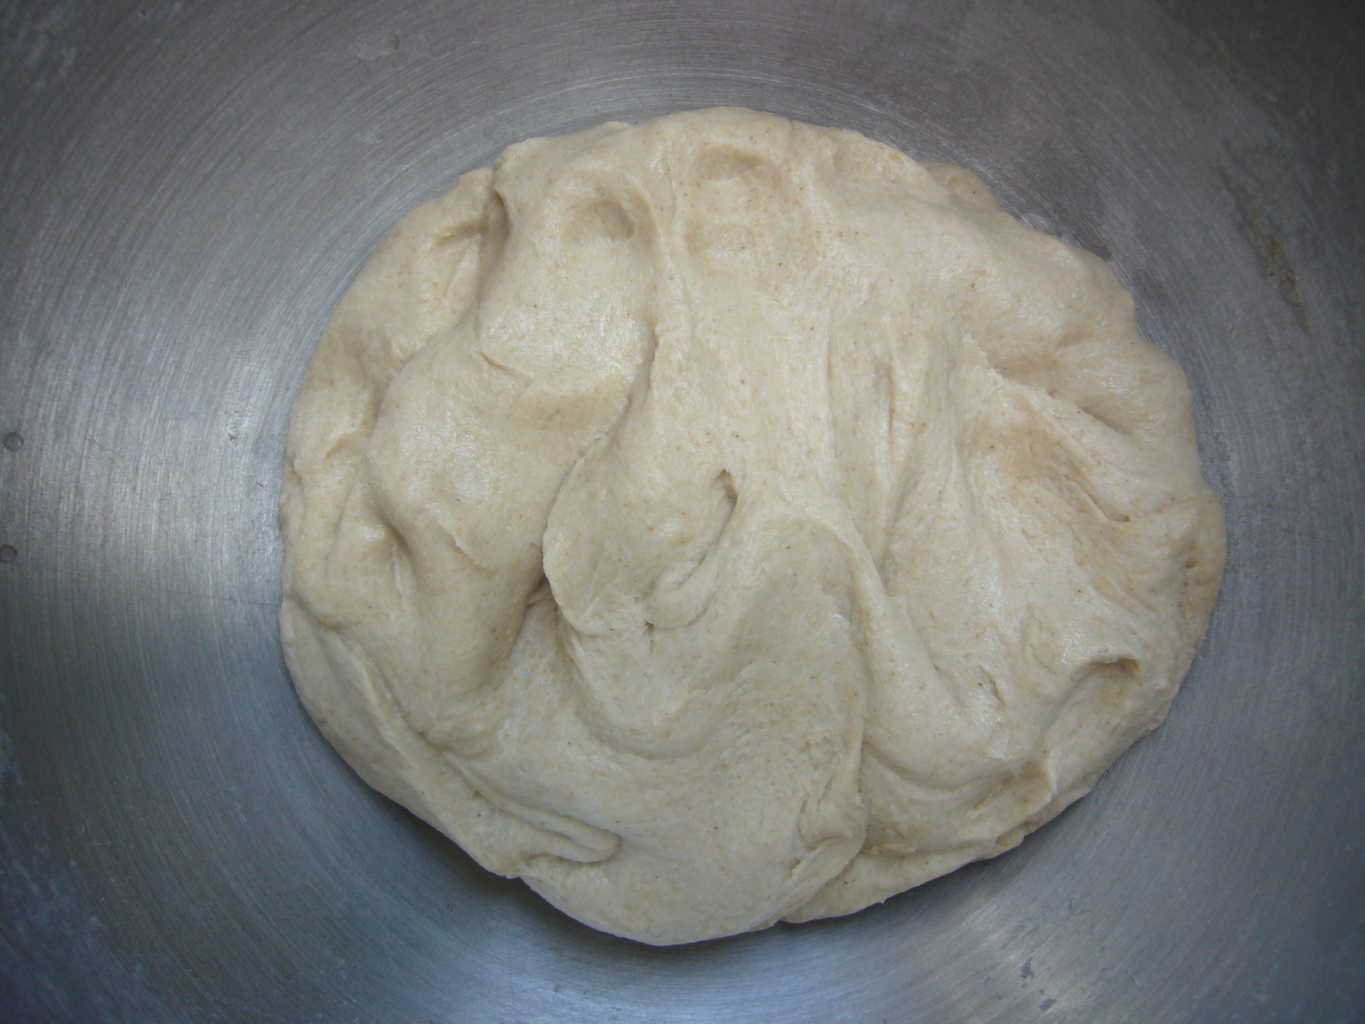 The whole wheat dough prepared for making the egg paratha.